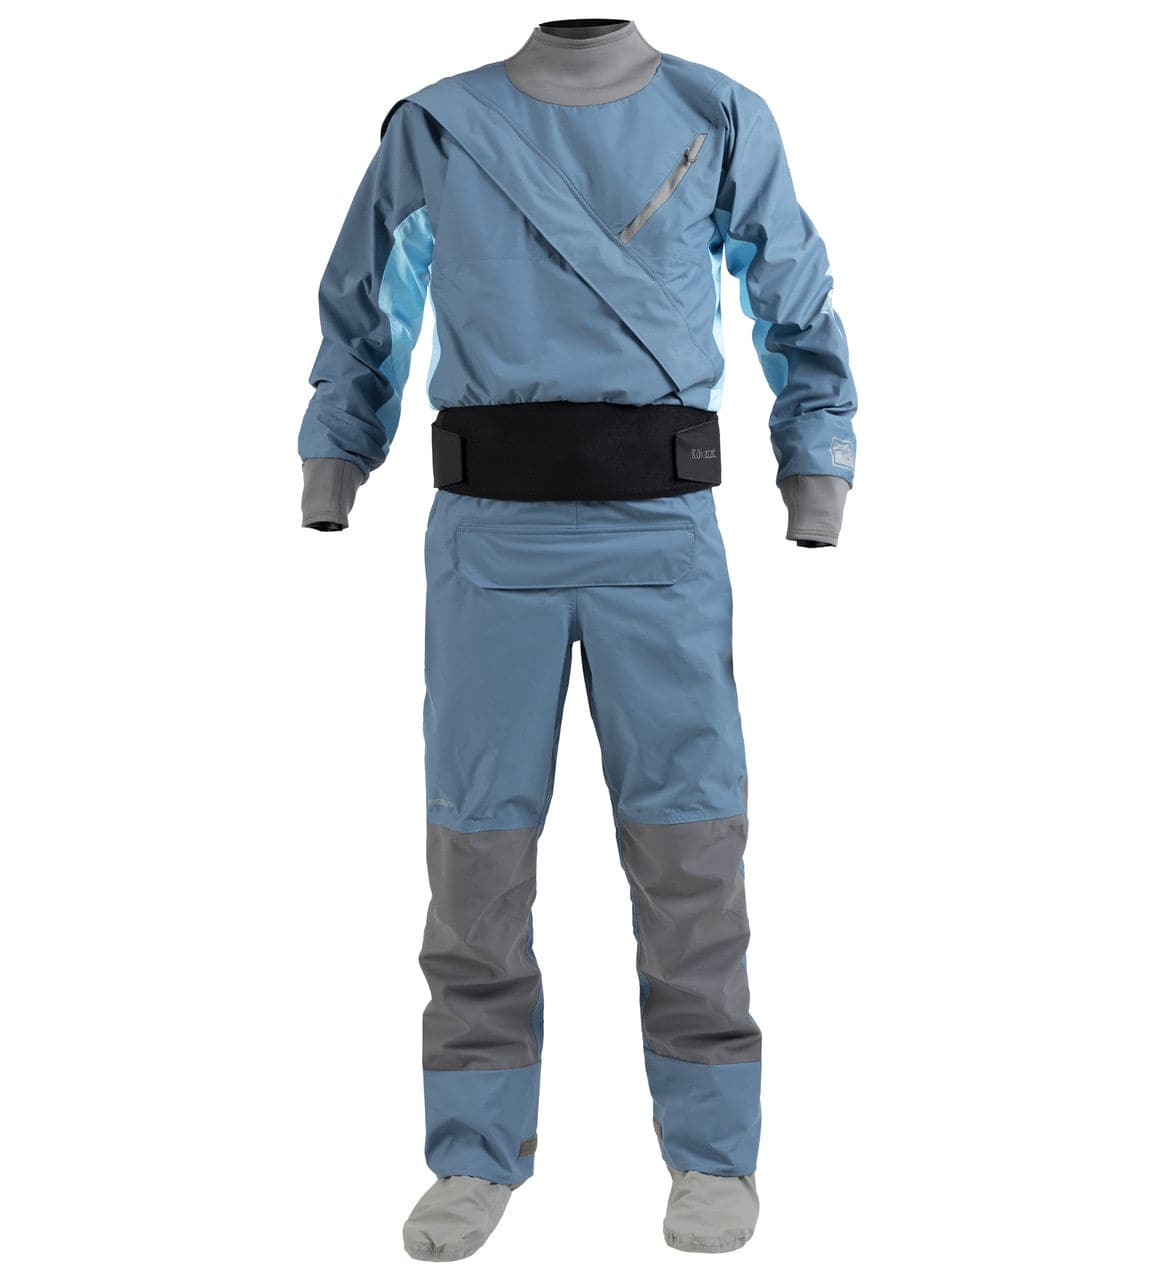 Featuring the Hydrus 3.0 Meridian Drysuit men's dry wear manufactured by Kokatat shown here from one angle.